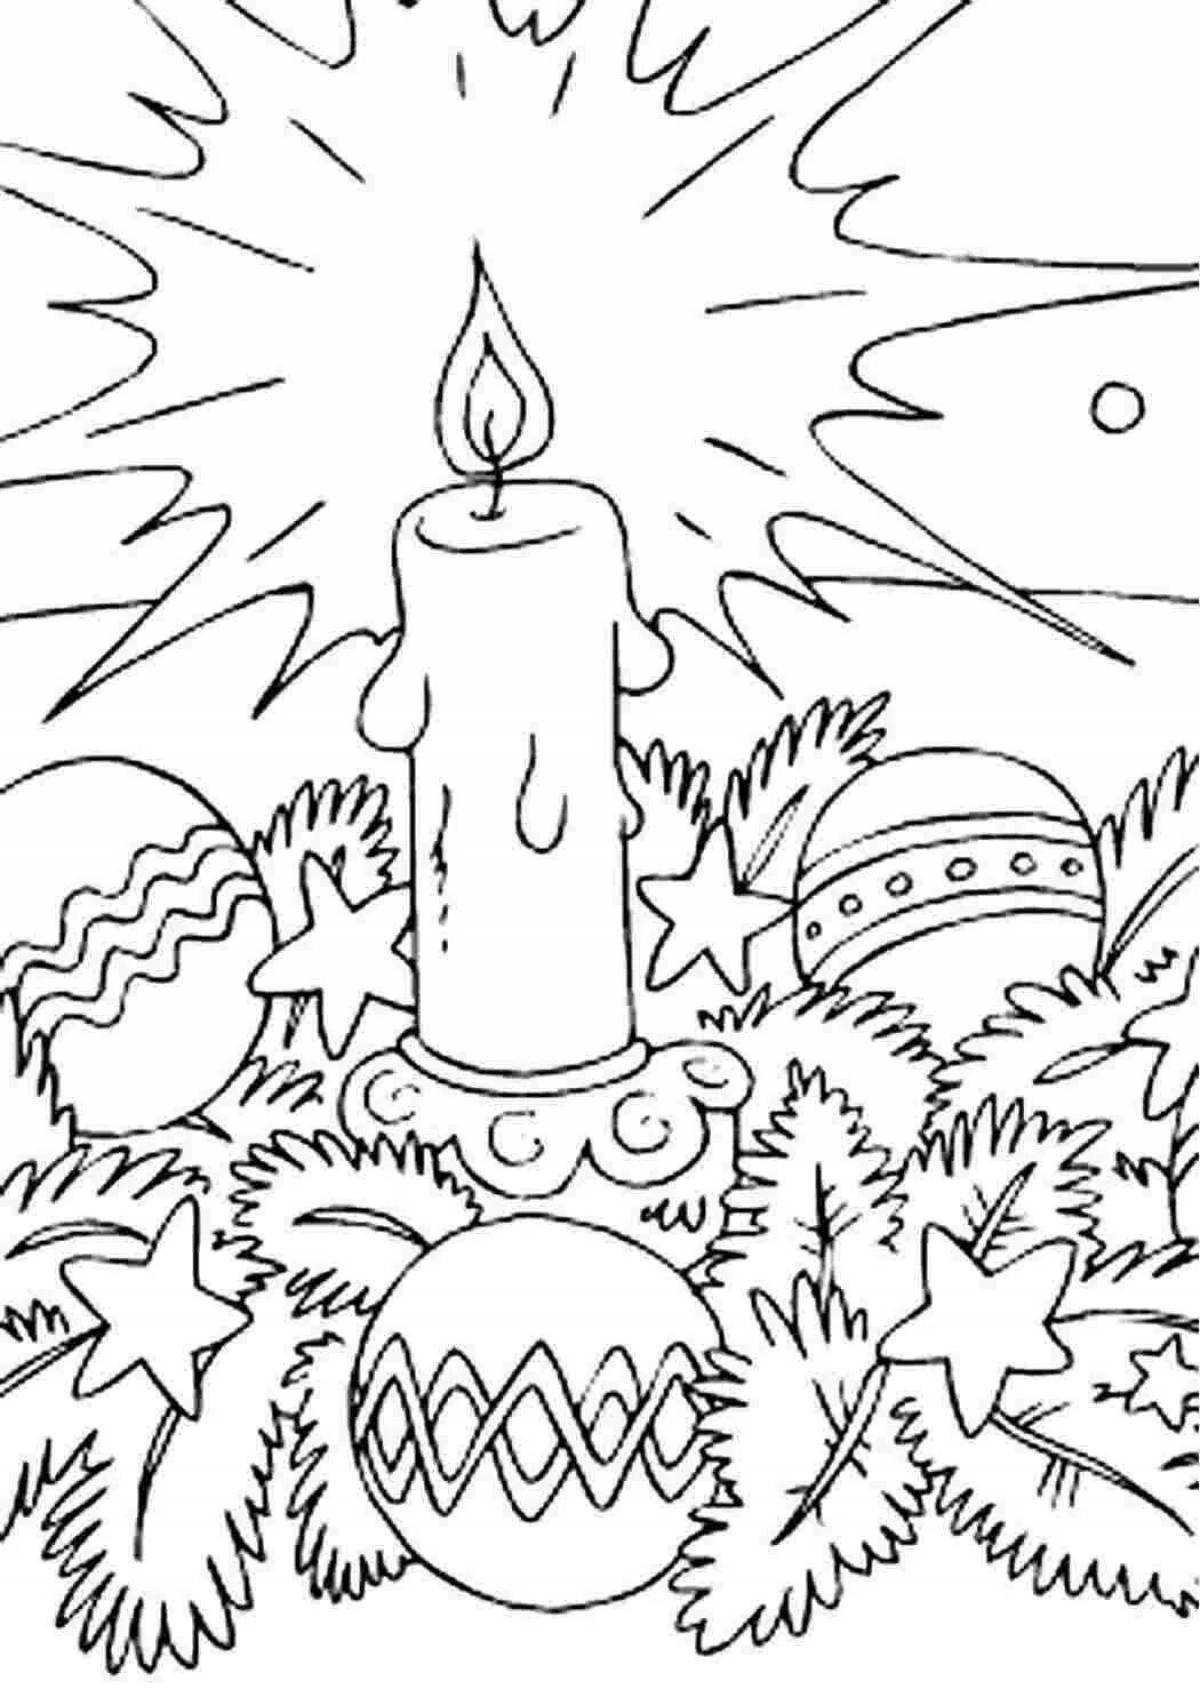 Christmas Eve playful coloring book